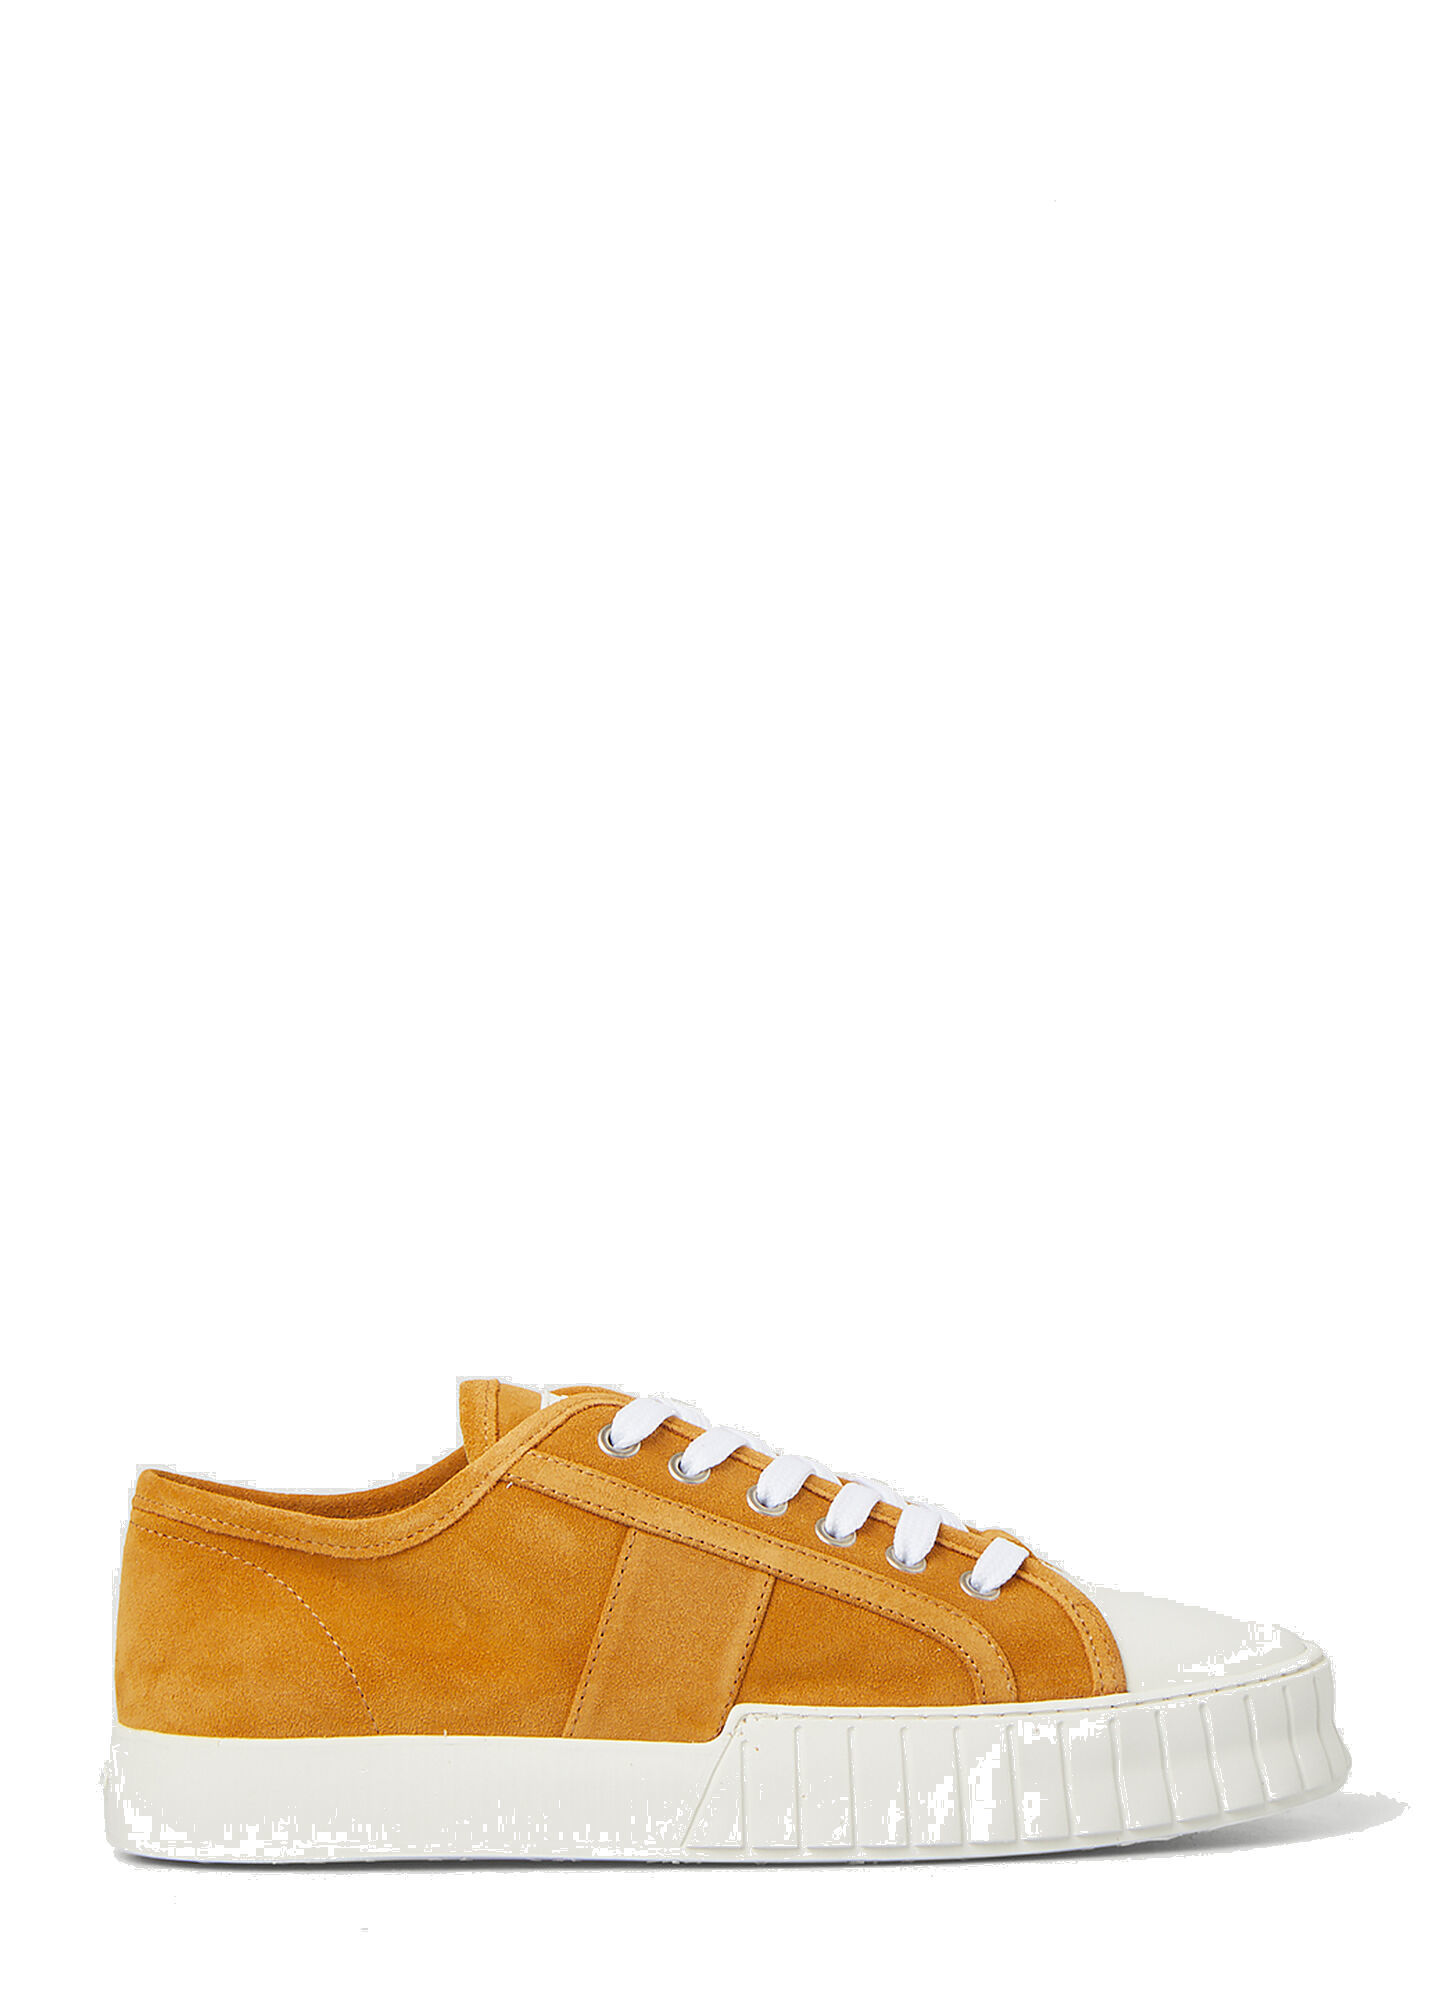 Photo: Dyo Low Top Sneakers in Camel